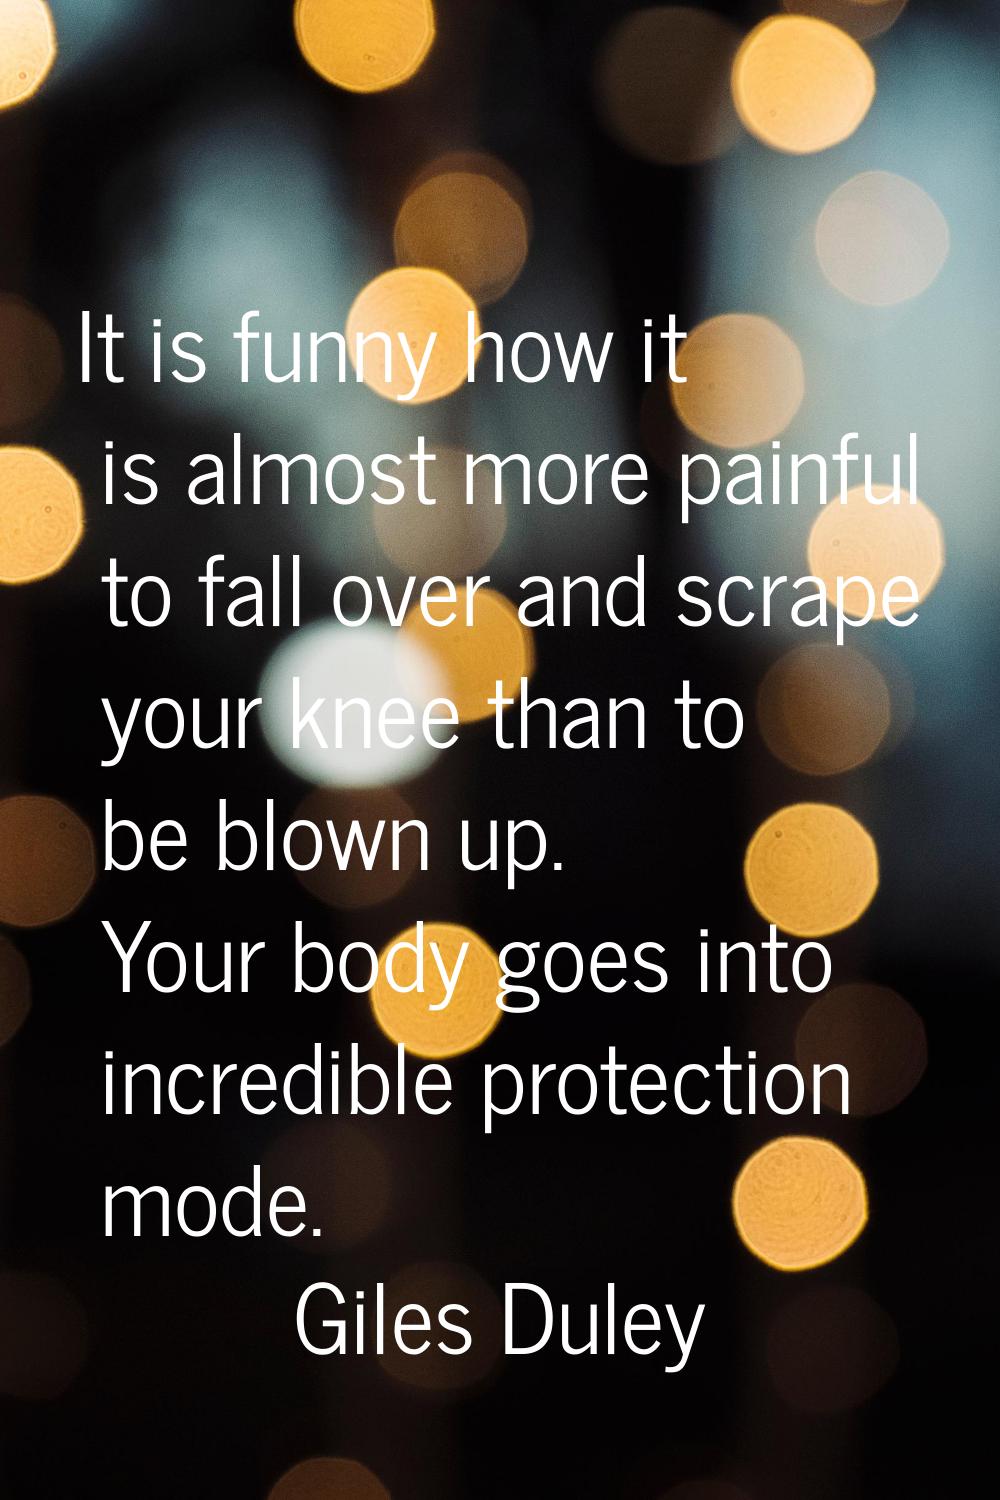 It is funny how it is almost more painful to fall over and scrape your knee than to be blown up. Yo